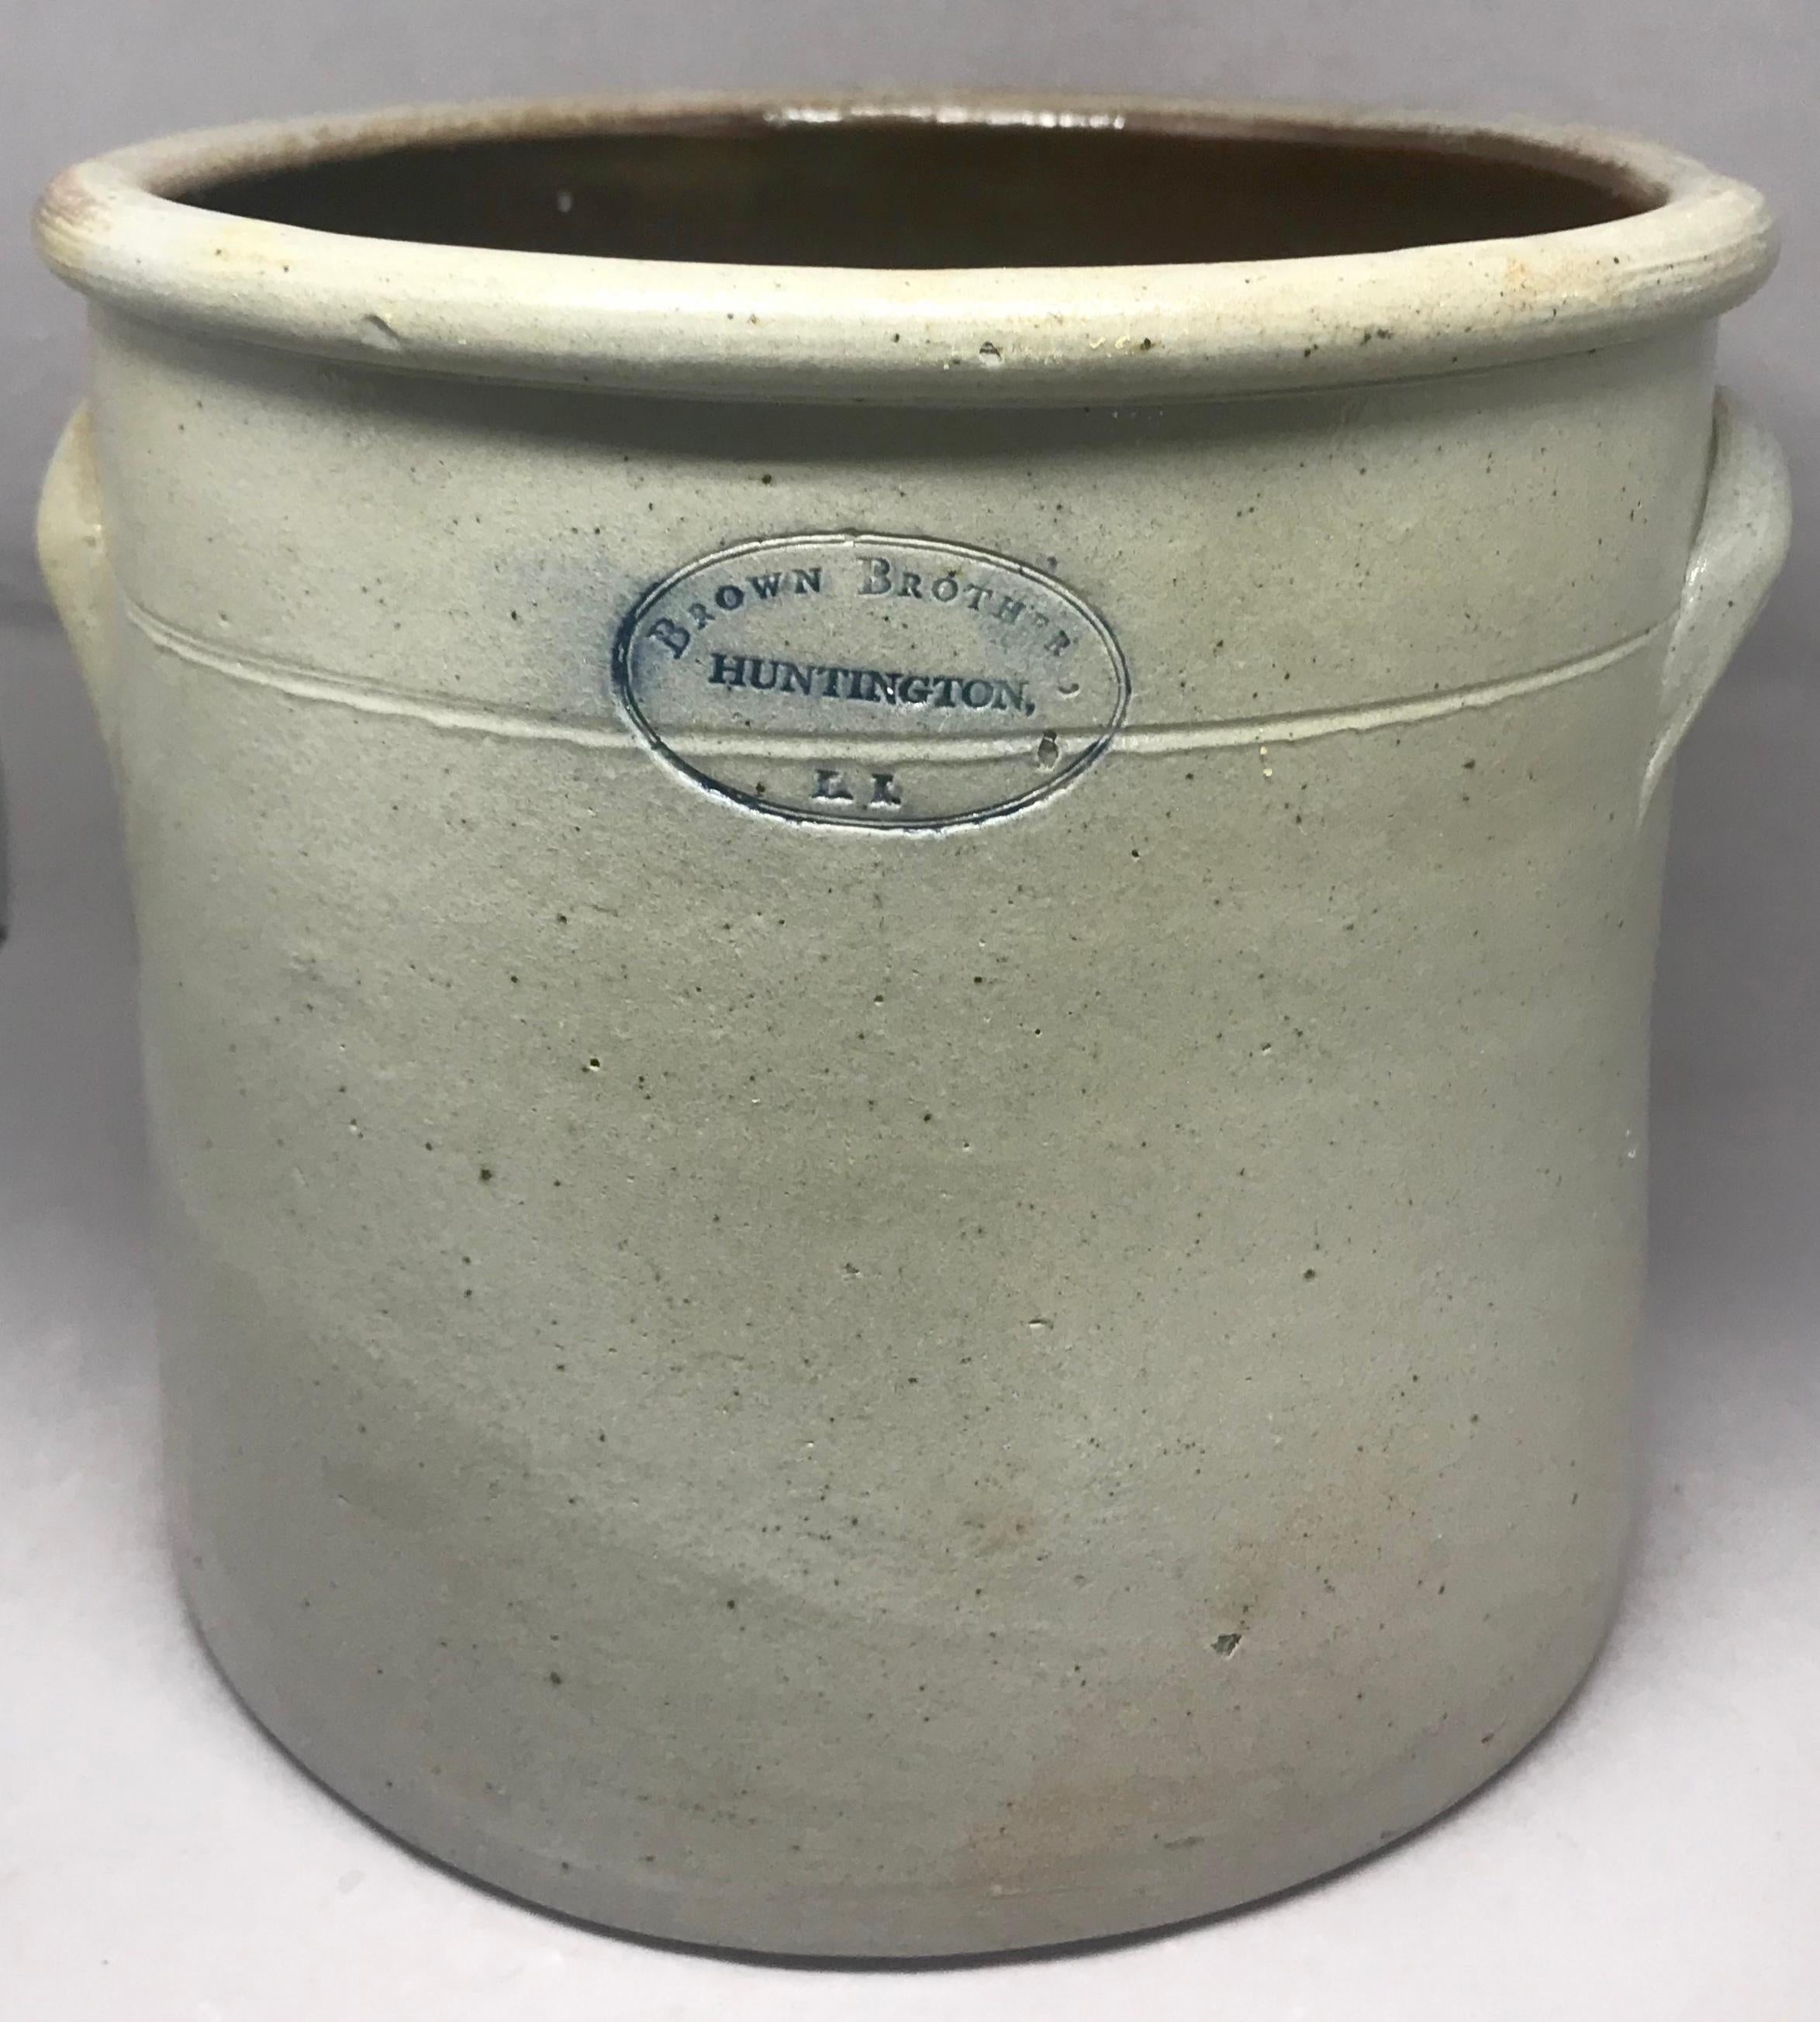 American Brown Brothers Stroneware Crock